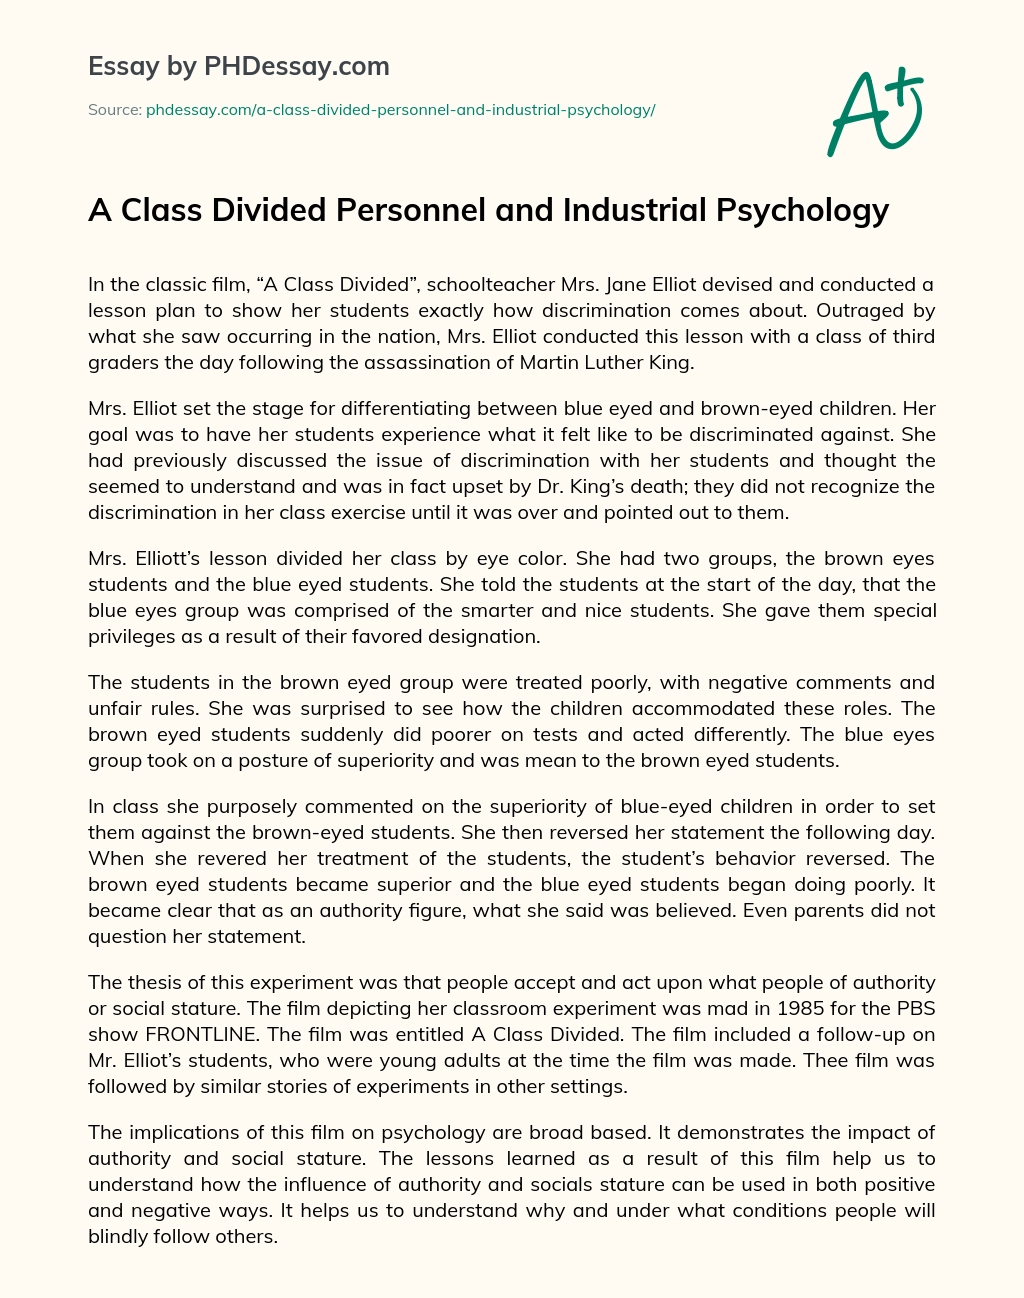 A Class Divided Personnel and Industrial Psychology essay